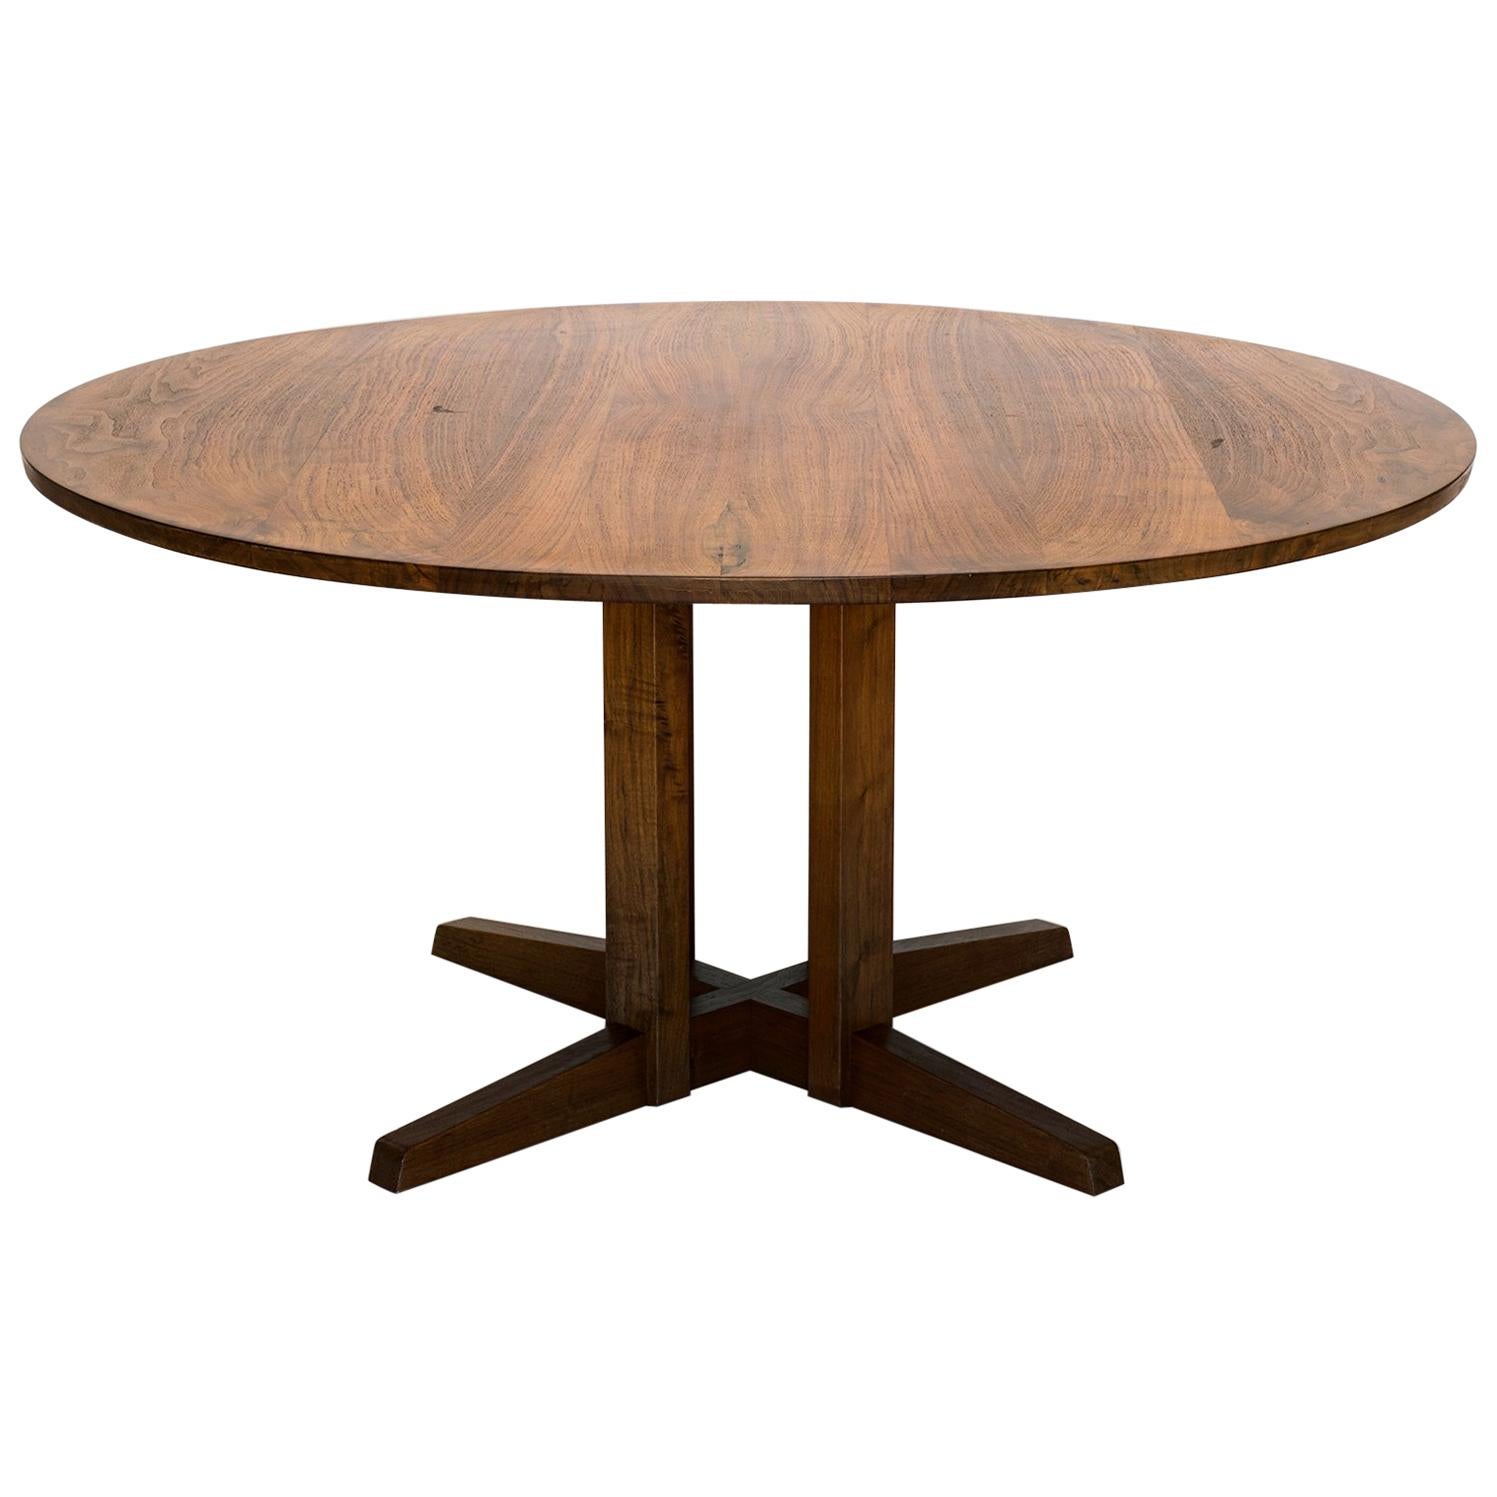 Early George Nakashima Round Cluster Table, United States, 1958 at 1stDibs